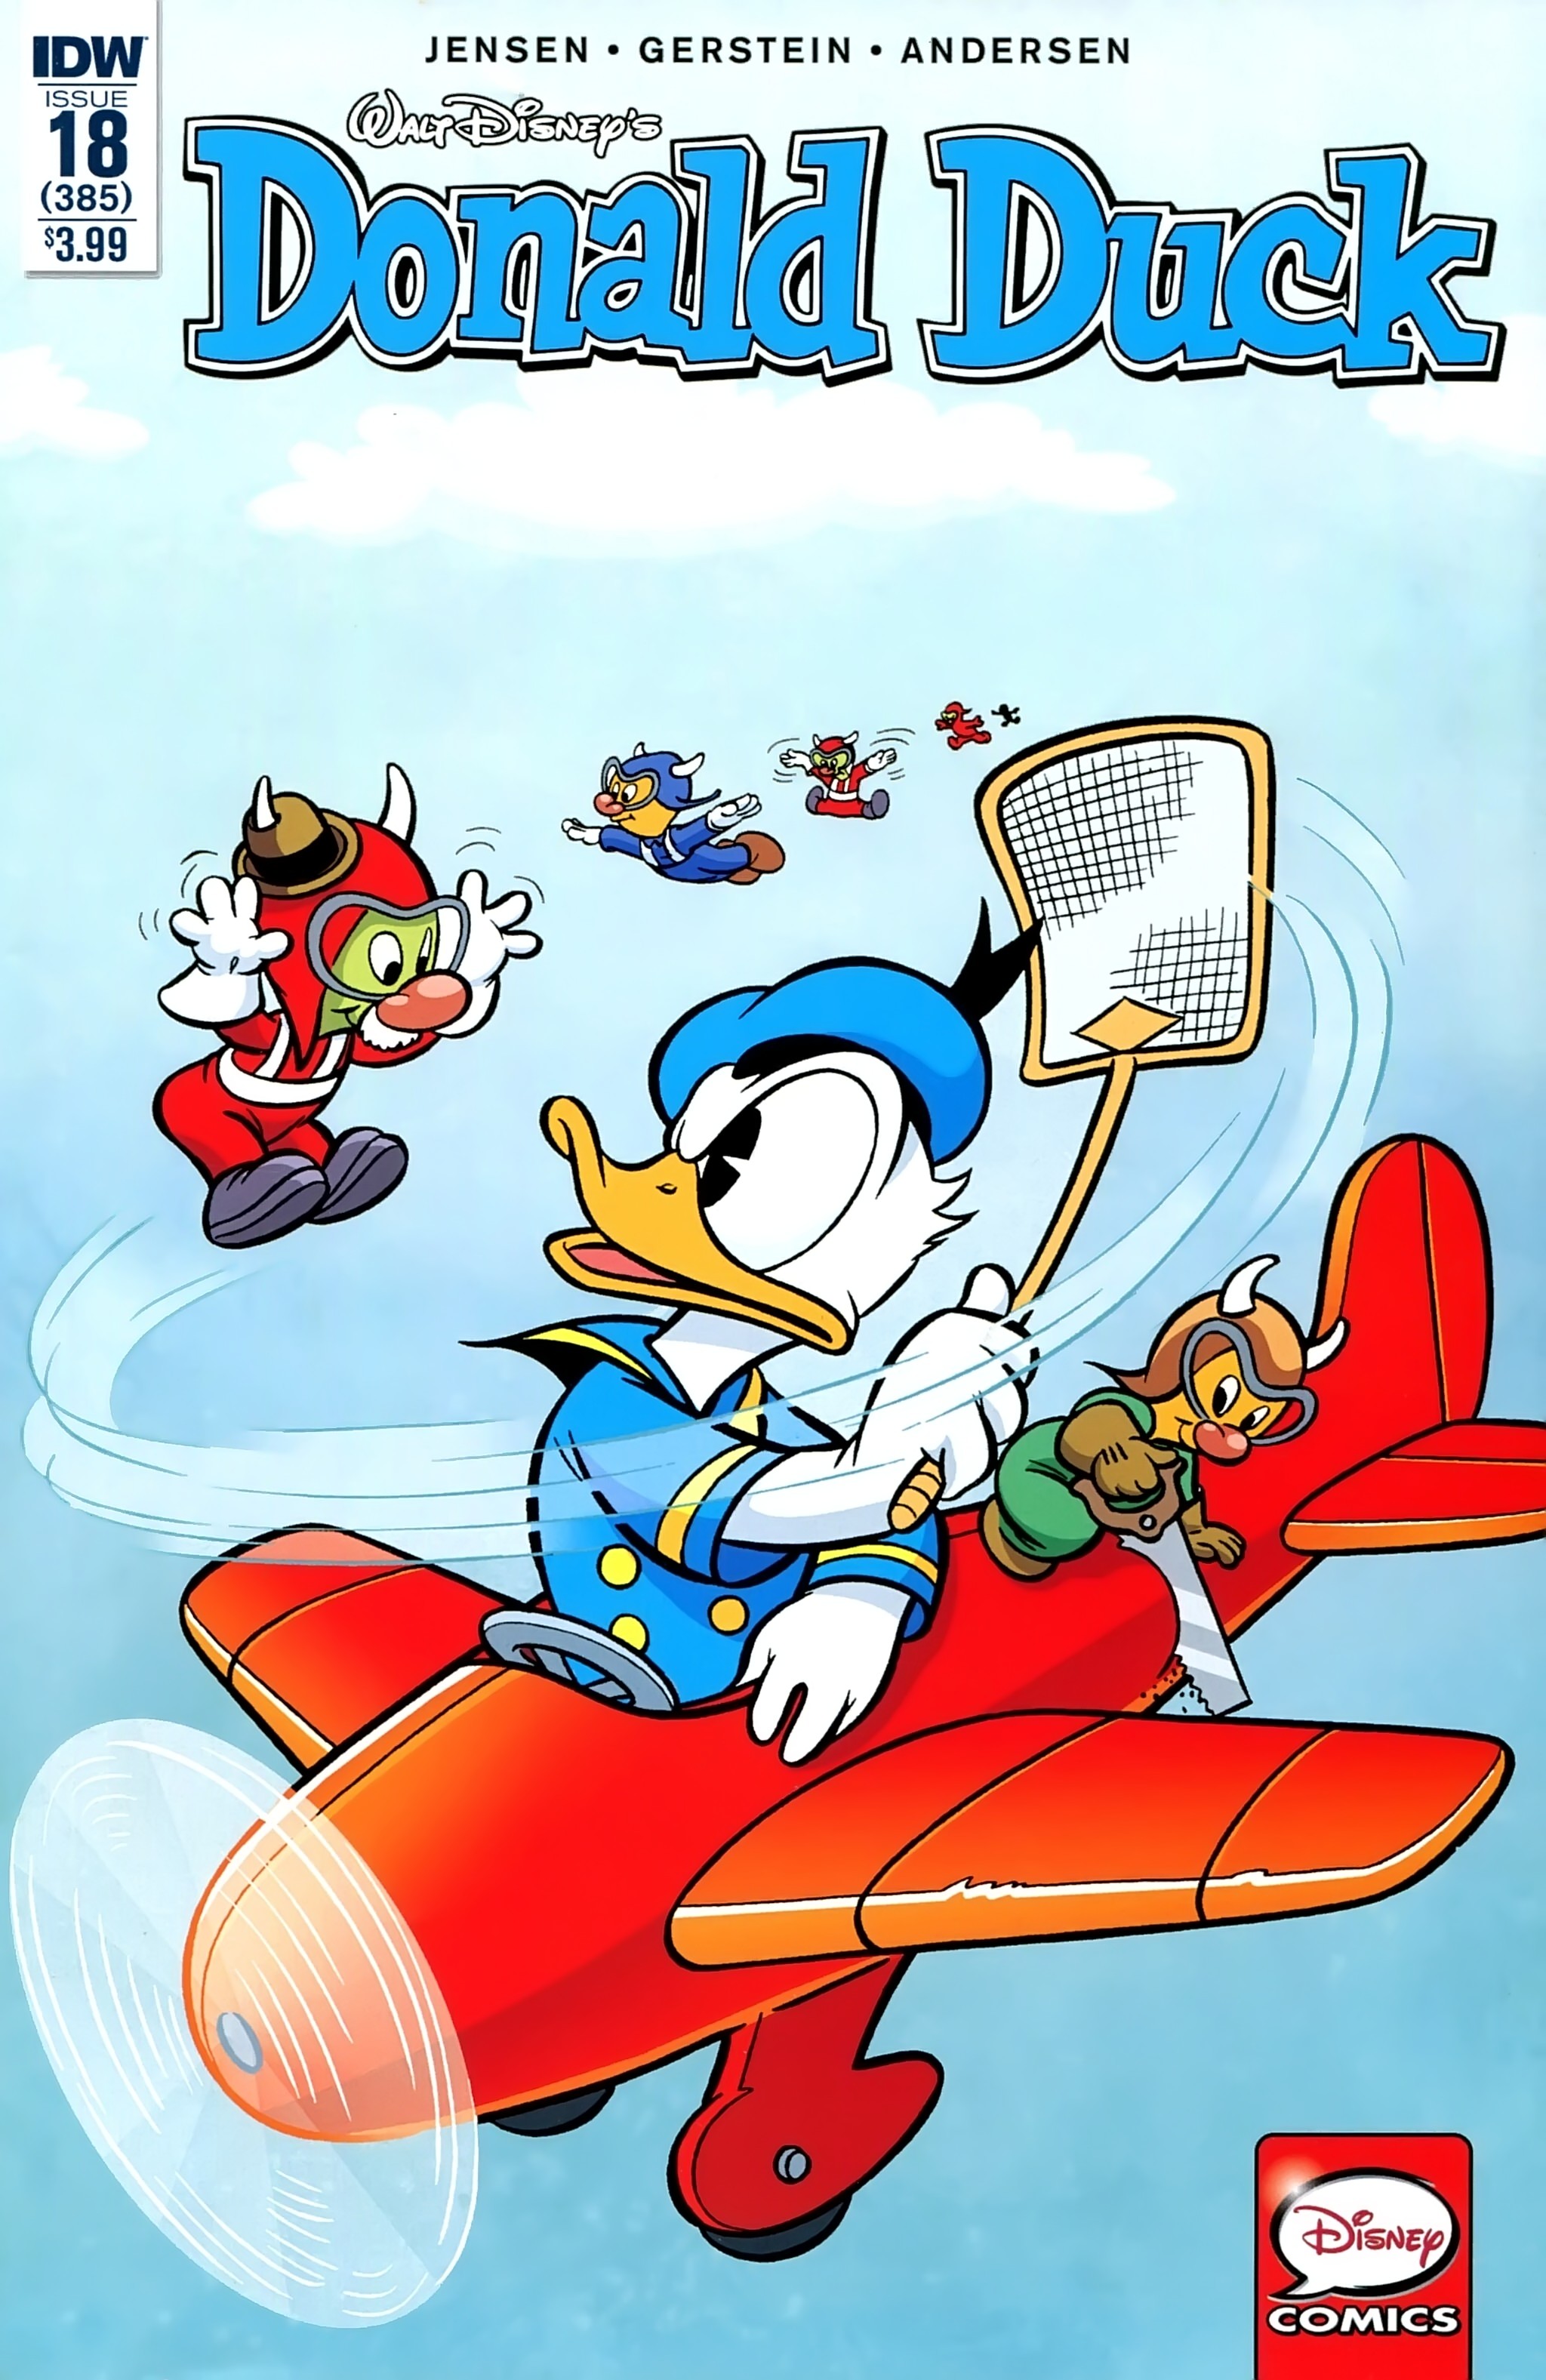 Read online Donald Duck (2015) comic -  Issue #18 - 1